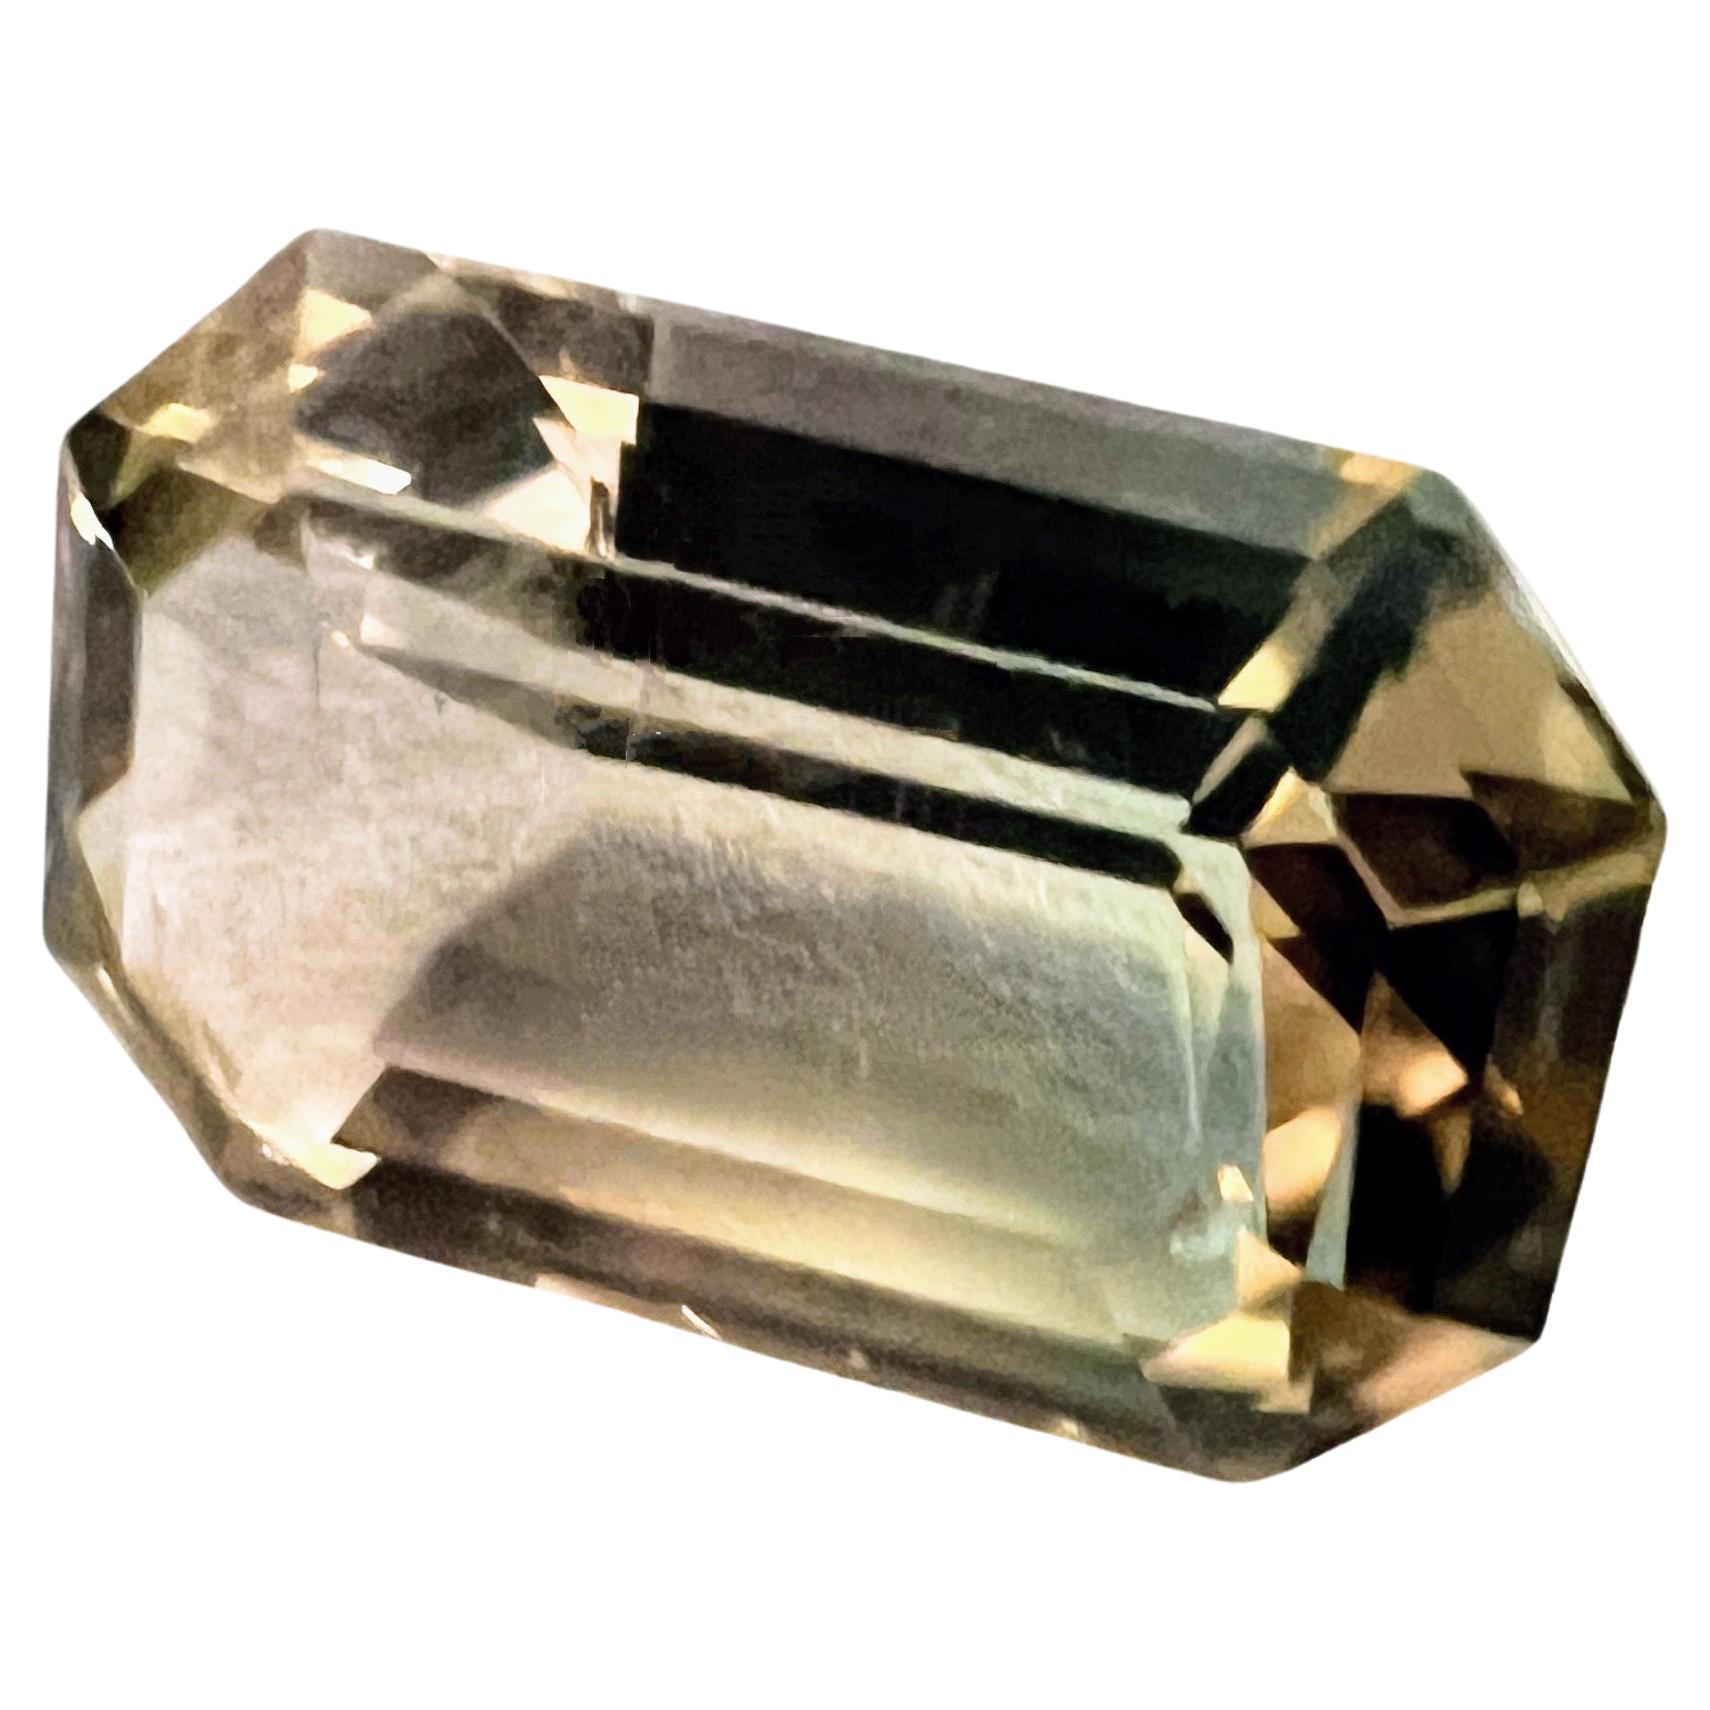 Feast your eyes on this 6.09ct Baguette Cut Bi-color Tourmaline – a stunning gem that showcases the incredible diversity of tourmalines.

What's special about this gem is its blend of two lovely colors: pinkish and greenish. It's like looking at a